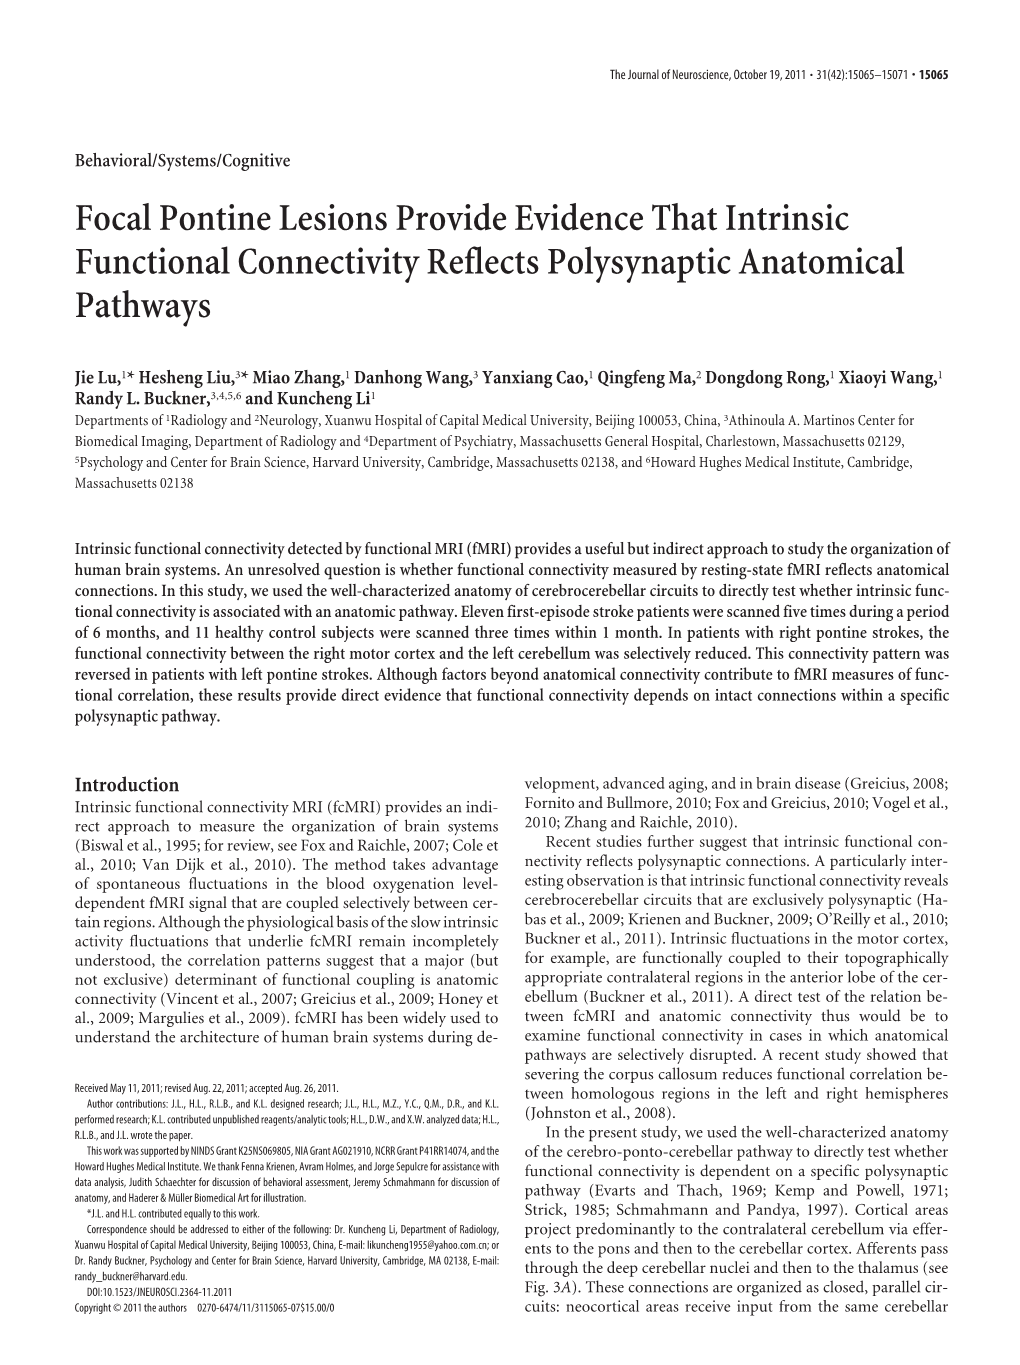 Focal Pontine Lesions Provide Evidence That Intrinsic Functional Connectivity Reflects Polysynaptic Anatomical Pathways